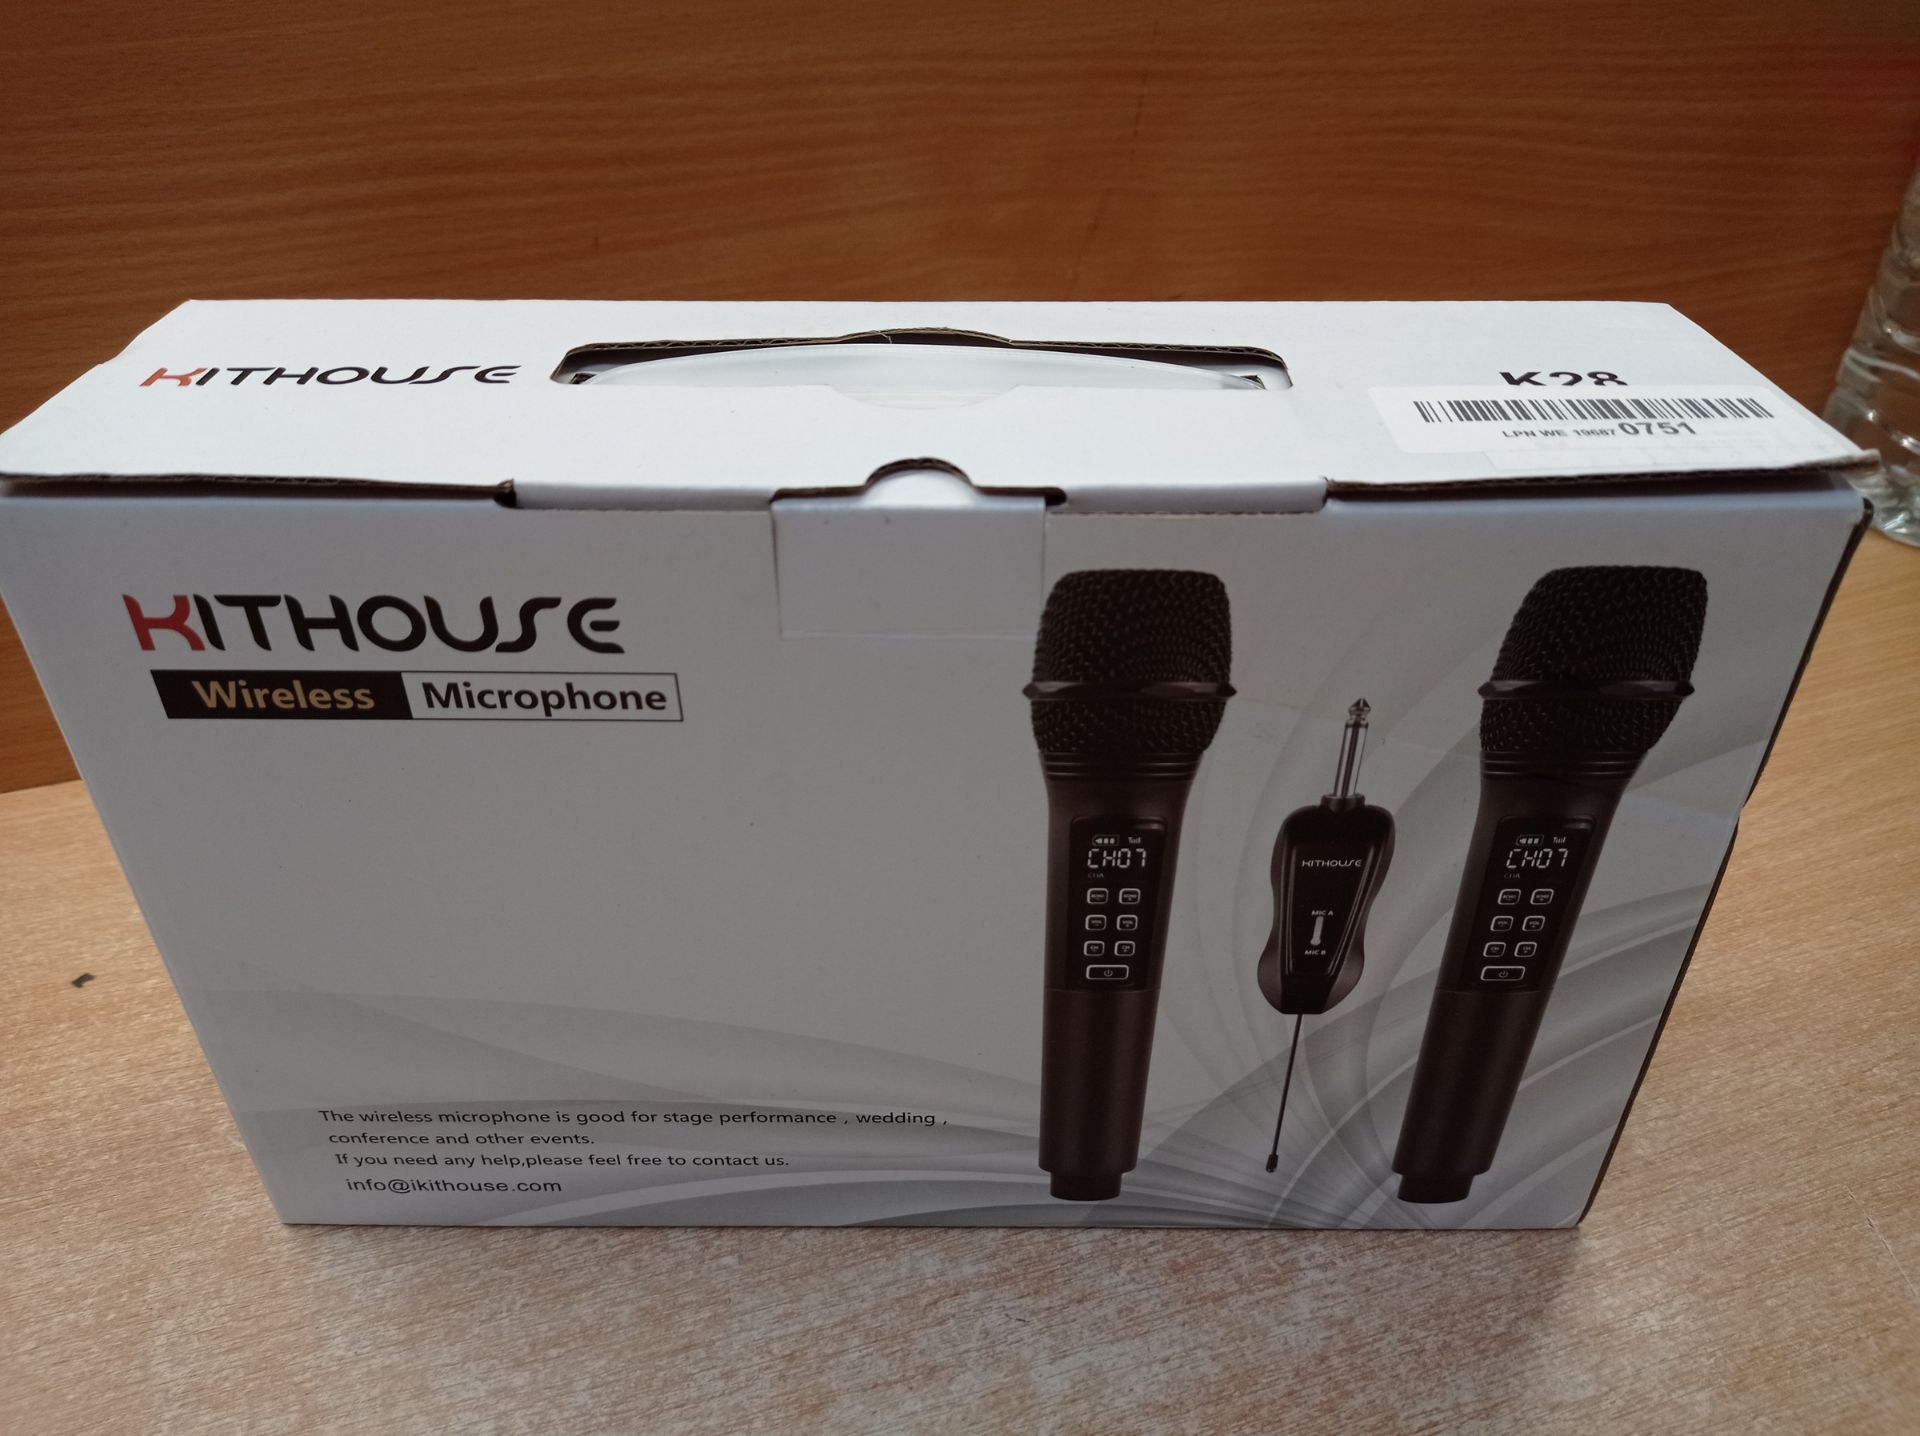 RRP £52.50 Kithouse Wireless Microphone Rechargeable Dual Microphones - Image 2 of 2